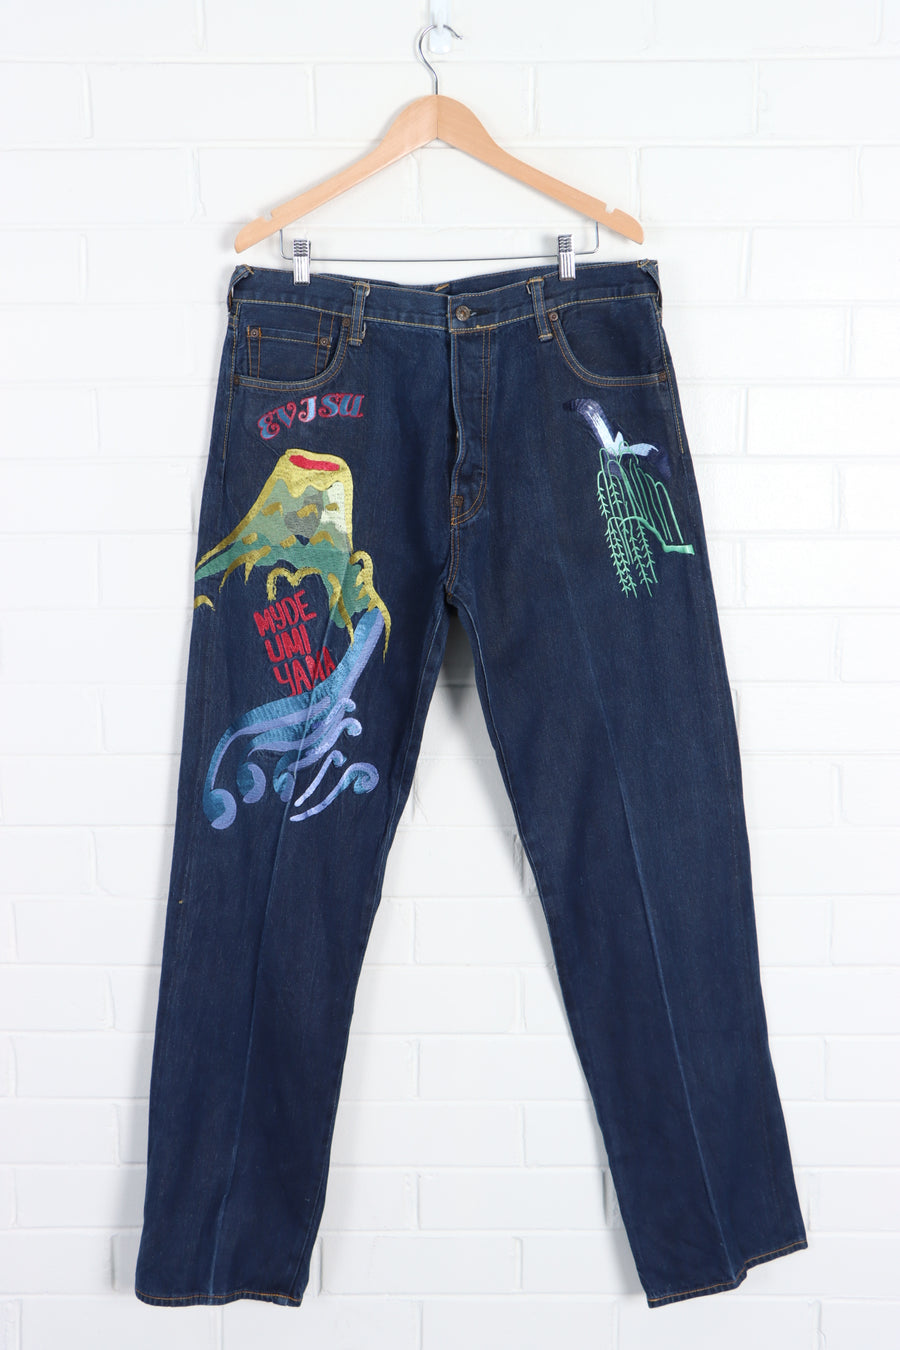 EVISU Heritage "Umi Yama" Embroidered Volcano Button Fly Jeans (38) - Vintage Sole Melbourne